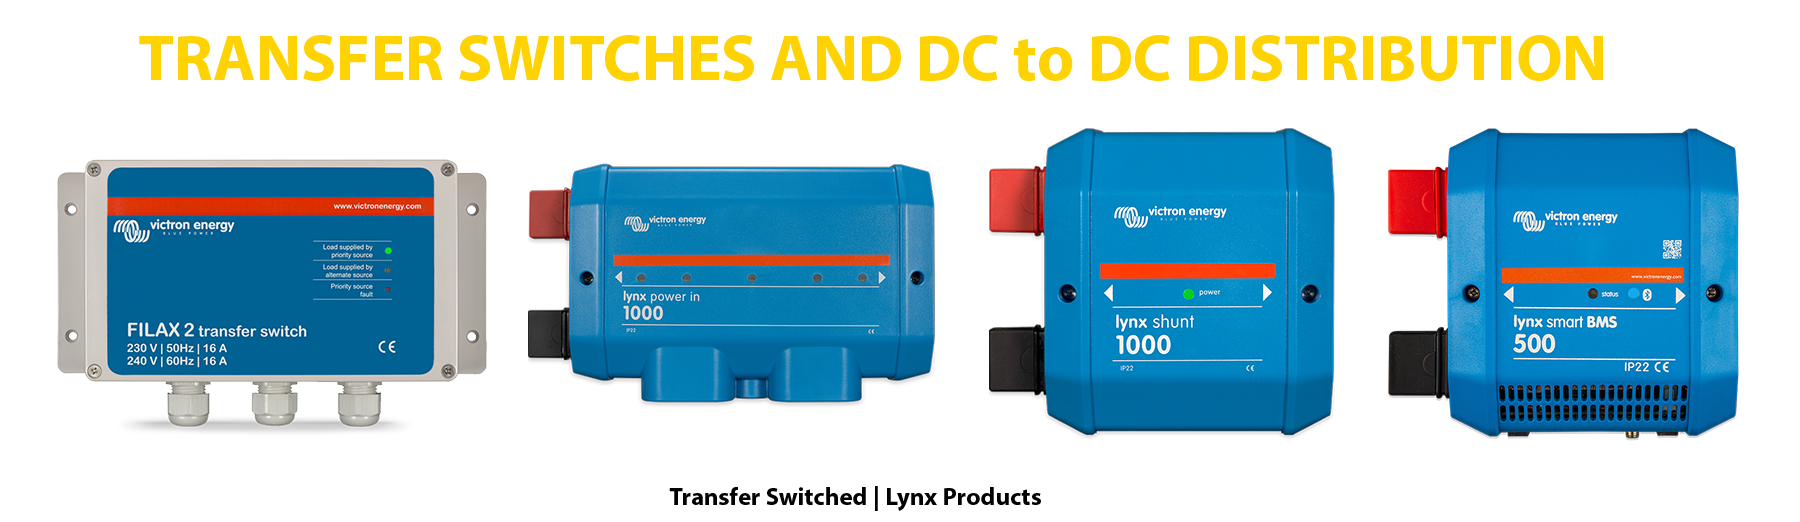 Transfer Switches and DC-Distribution